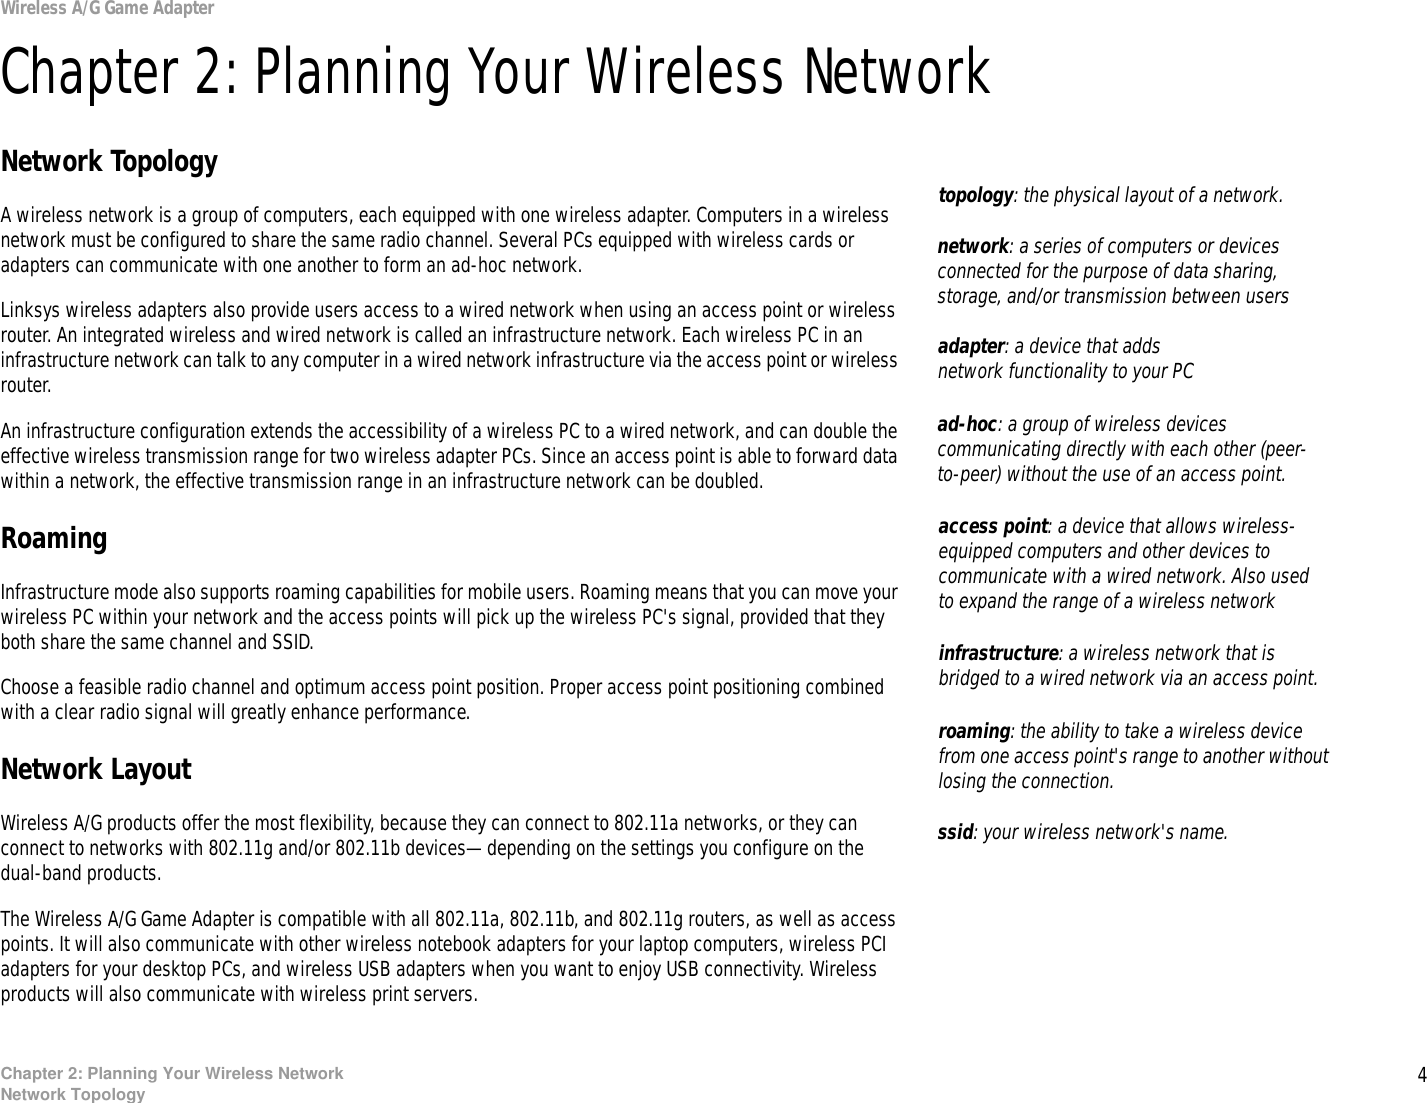 4Chapter 2: Planning Your Wireless NetworkNetwork TopologyWireless A/G Game AdapterChapter 2: Planning Your Wireless NetworkNetwork TopologyA wireless network is a group of computers, each equipped with one wireless adapter. Computers in a wireless network must be configured to share the same radio channel. Several PCs equipped with wireless cards or adapters can communicate with one another to form an ad-hoc network.Linksys wireless adapters also provide users access to a wired network when using an access point or wireless router. An integrated wireless and wired network is called an infrastructure network. Each wireless PC in an infrastructure network can talk to any computer in a wired network infrastructure via the access point or wireless router.An infrastructure configuration extends the accessibility of a wireless PC to a wired network, and can double the effective wireless transmission range for two wireless adapter PCs. Since an access point is able to forward data within a network, the effective transmission range in an infrastructure network can be doubled.RoamingInfrastructure mode also supports roaming capabilities for mobile users. Roaming means that you can move your wireless PC within your network and the access points will pick up the wireless PC&apos;s signal, provided that they both share the same channel and SSID.Choose a feasible radio channel and optimum access point position. Proper access point positioning combined with a clear radio signal will greatly enhance performance.Network LayoutWireless A/G products offer the most flexibility, because they can connect to 802.11a networks, or they can connect to networks with 802.11g and/or 802.11b devices—depending on the settings you configure on the dual-band products.The Wireless A/G Game Adapter is compatible with all 802.11a, 802.11b, and 802.11g routers, as well as access points. It will also communicate with other wireless notebook adapters for your laptop computers, wireless PCI adapters for your desktop PCs, and wireless USB adapters when you want to enjoy USB connectivity. Wireless products will also communicate with wireless print servers.infrastructure: a wireless network that is bridged to a wired network via an access point.ad-hoc: a group of wireless devices communicating directly with each other (peer-to-peer) without the use of an access point.roaming: the ability to take a wireless device from one access point&apos;s range to another without losing the connection.ssid: your wireless network&apos;s name.topology: the physical layout of a network.access point: a device that allows wireless-equipped computers and other devices to communicate with a wired network. Also used to expand the range of a wireless networkadapter: a device that adds network functionality to your PCnetwork: a series of computers or devices connected for the purpose of data sharing, storage, and/or transmission between users